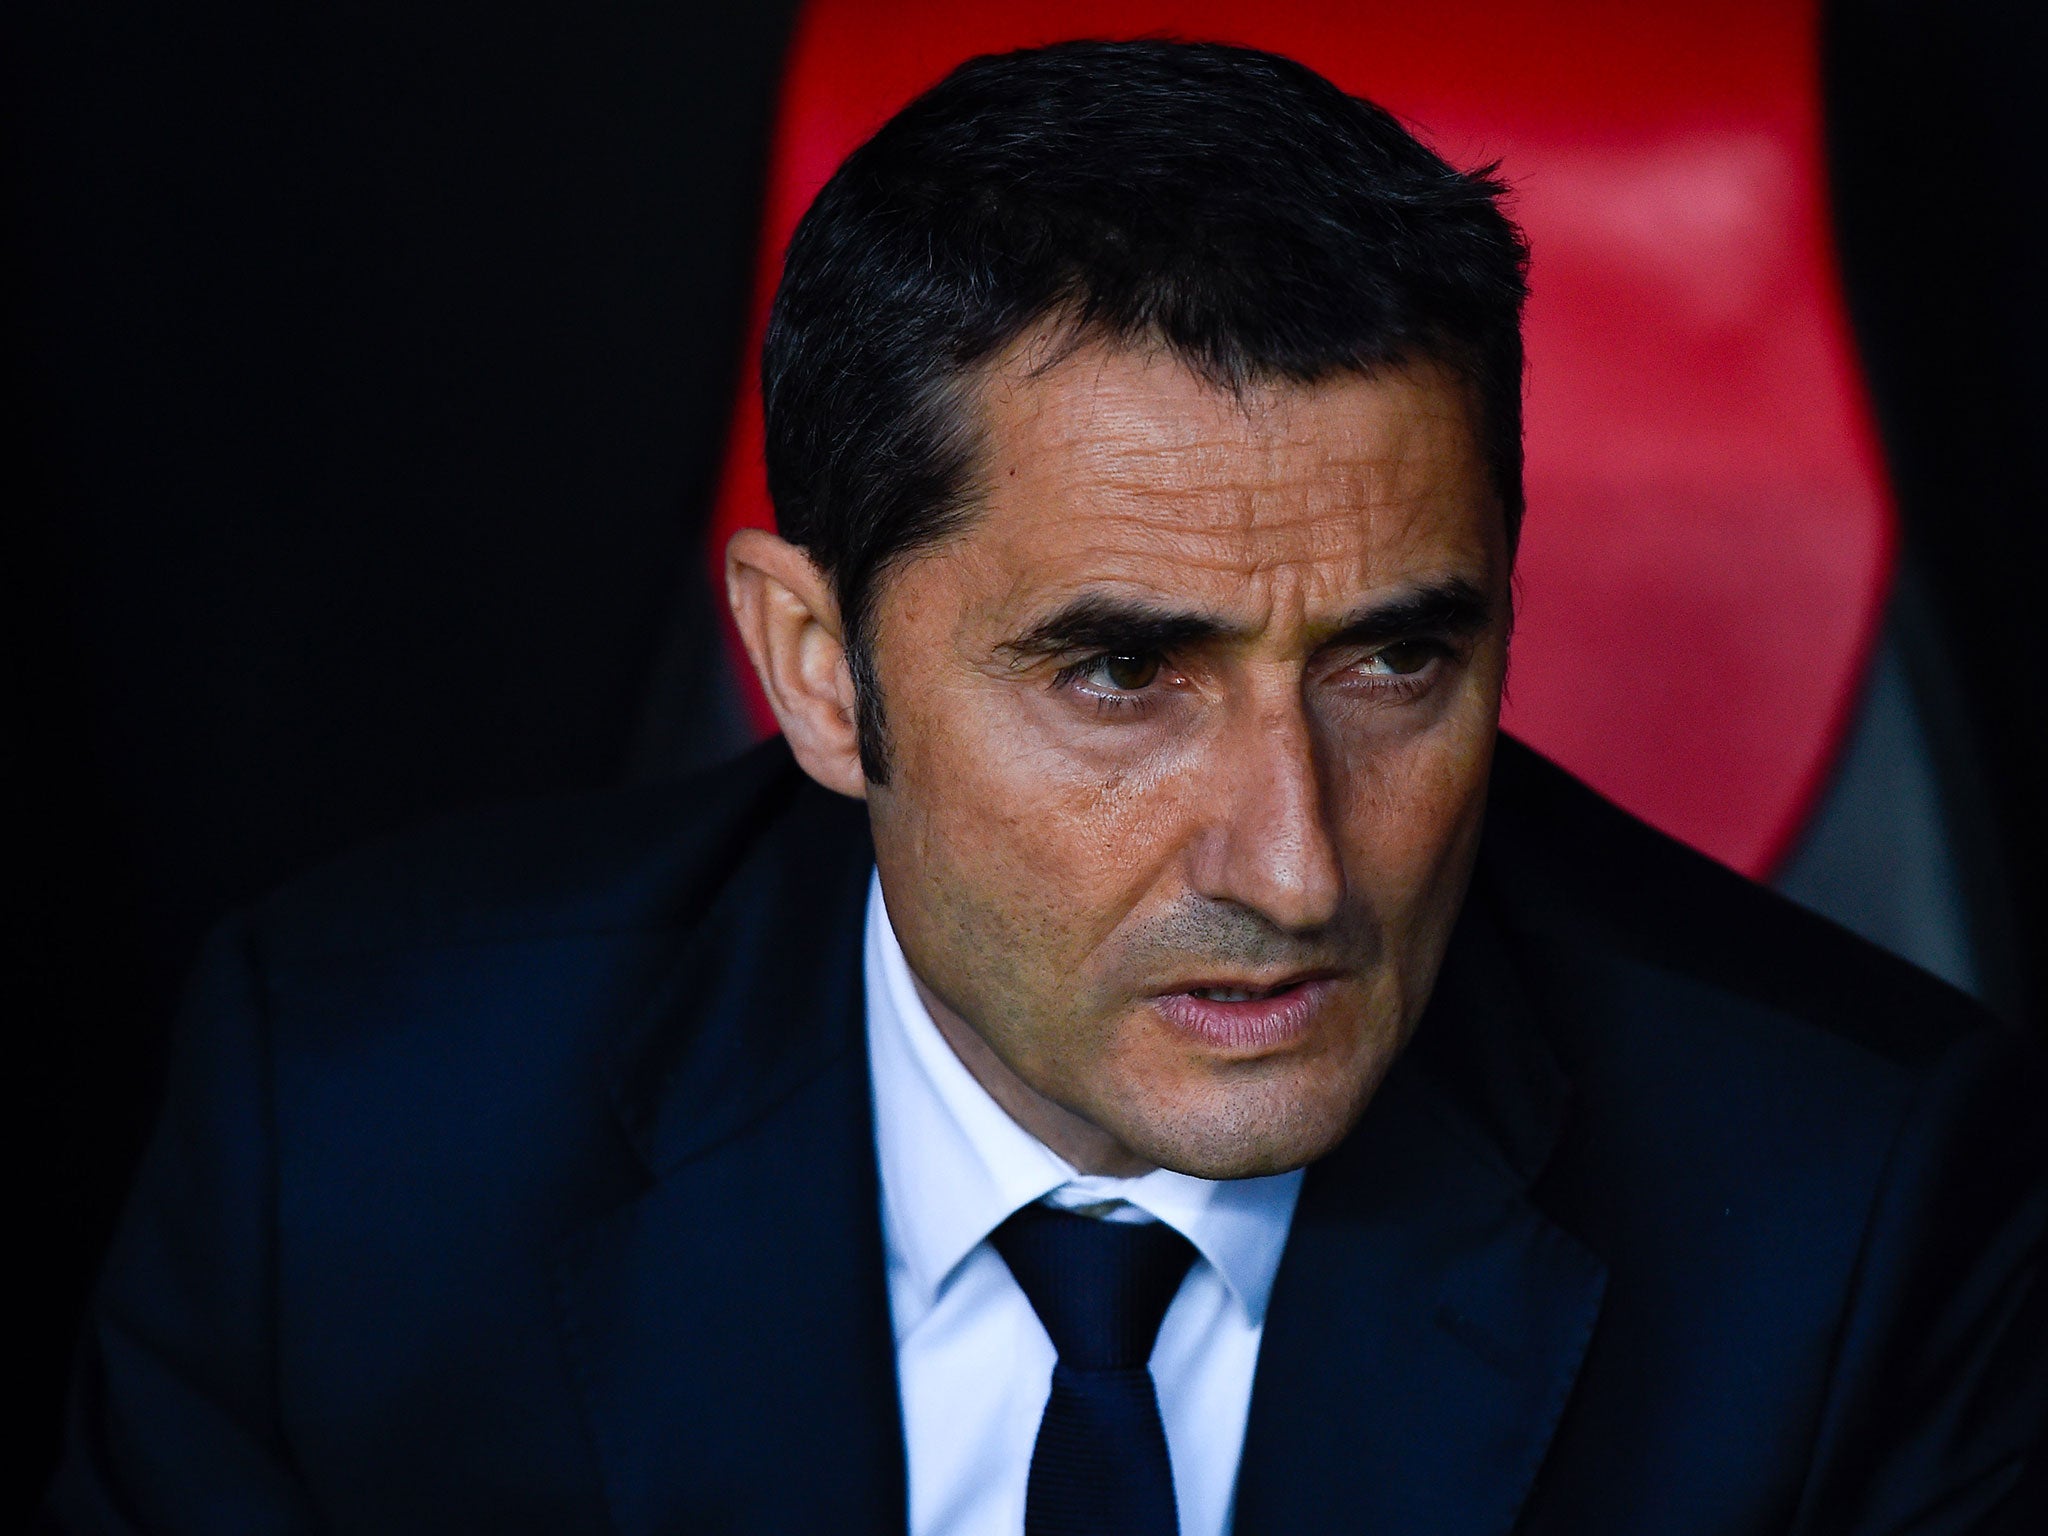 Ernesto Valverde is expected to be named the new Barcelona coach